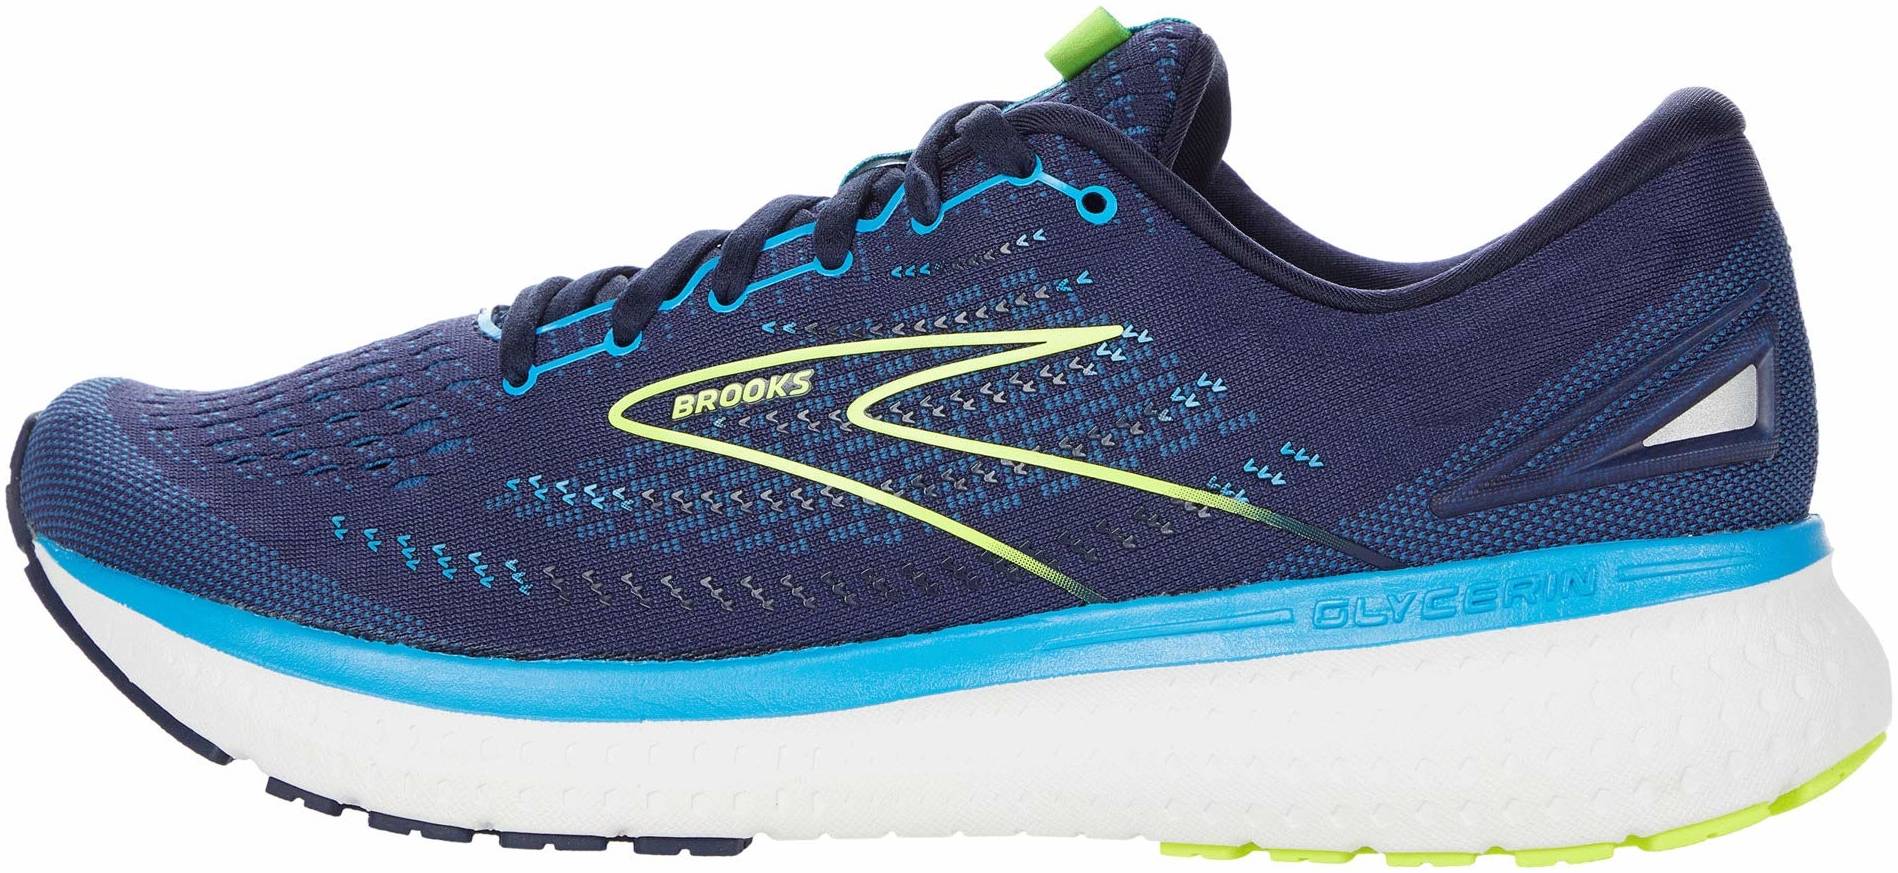 when do new brooks shoes come out